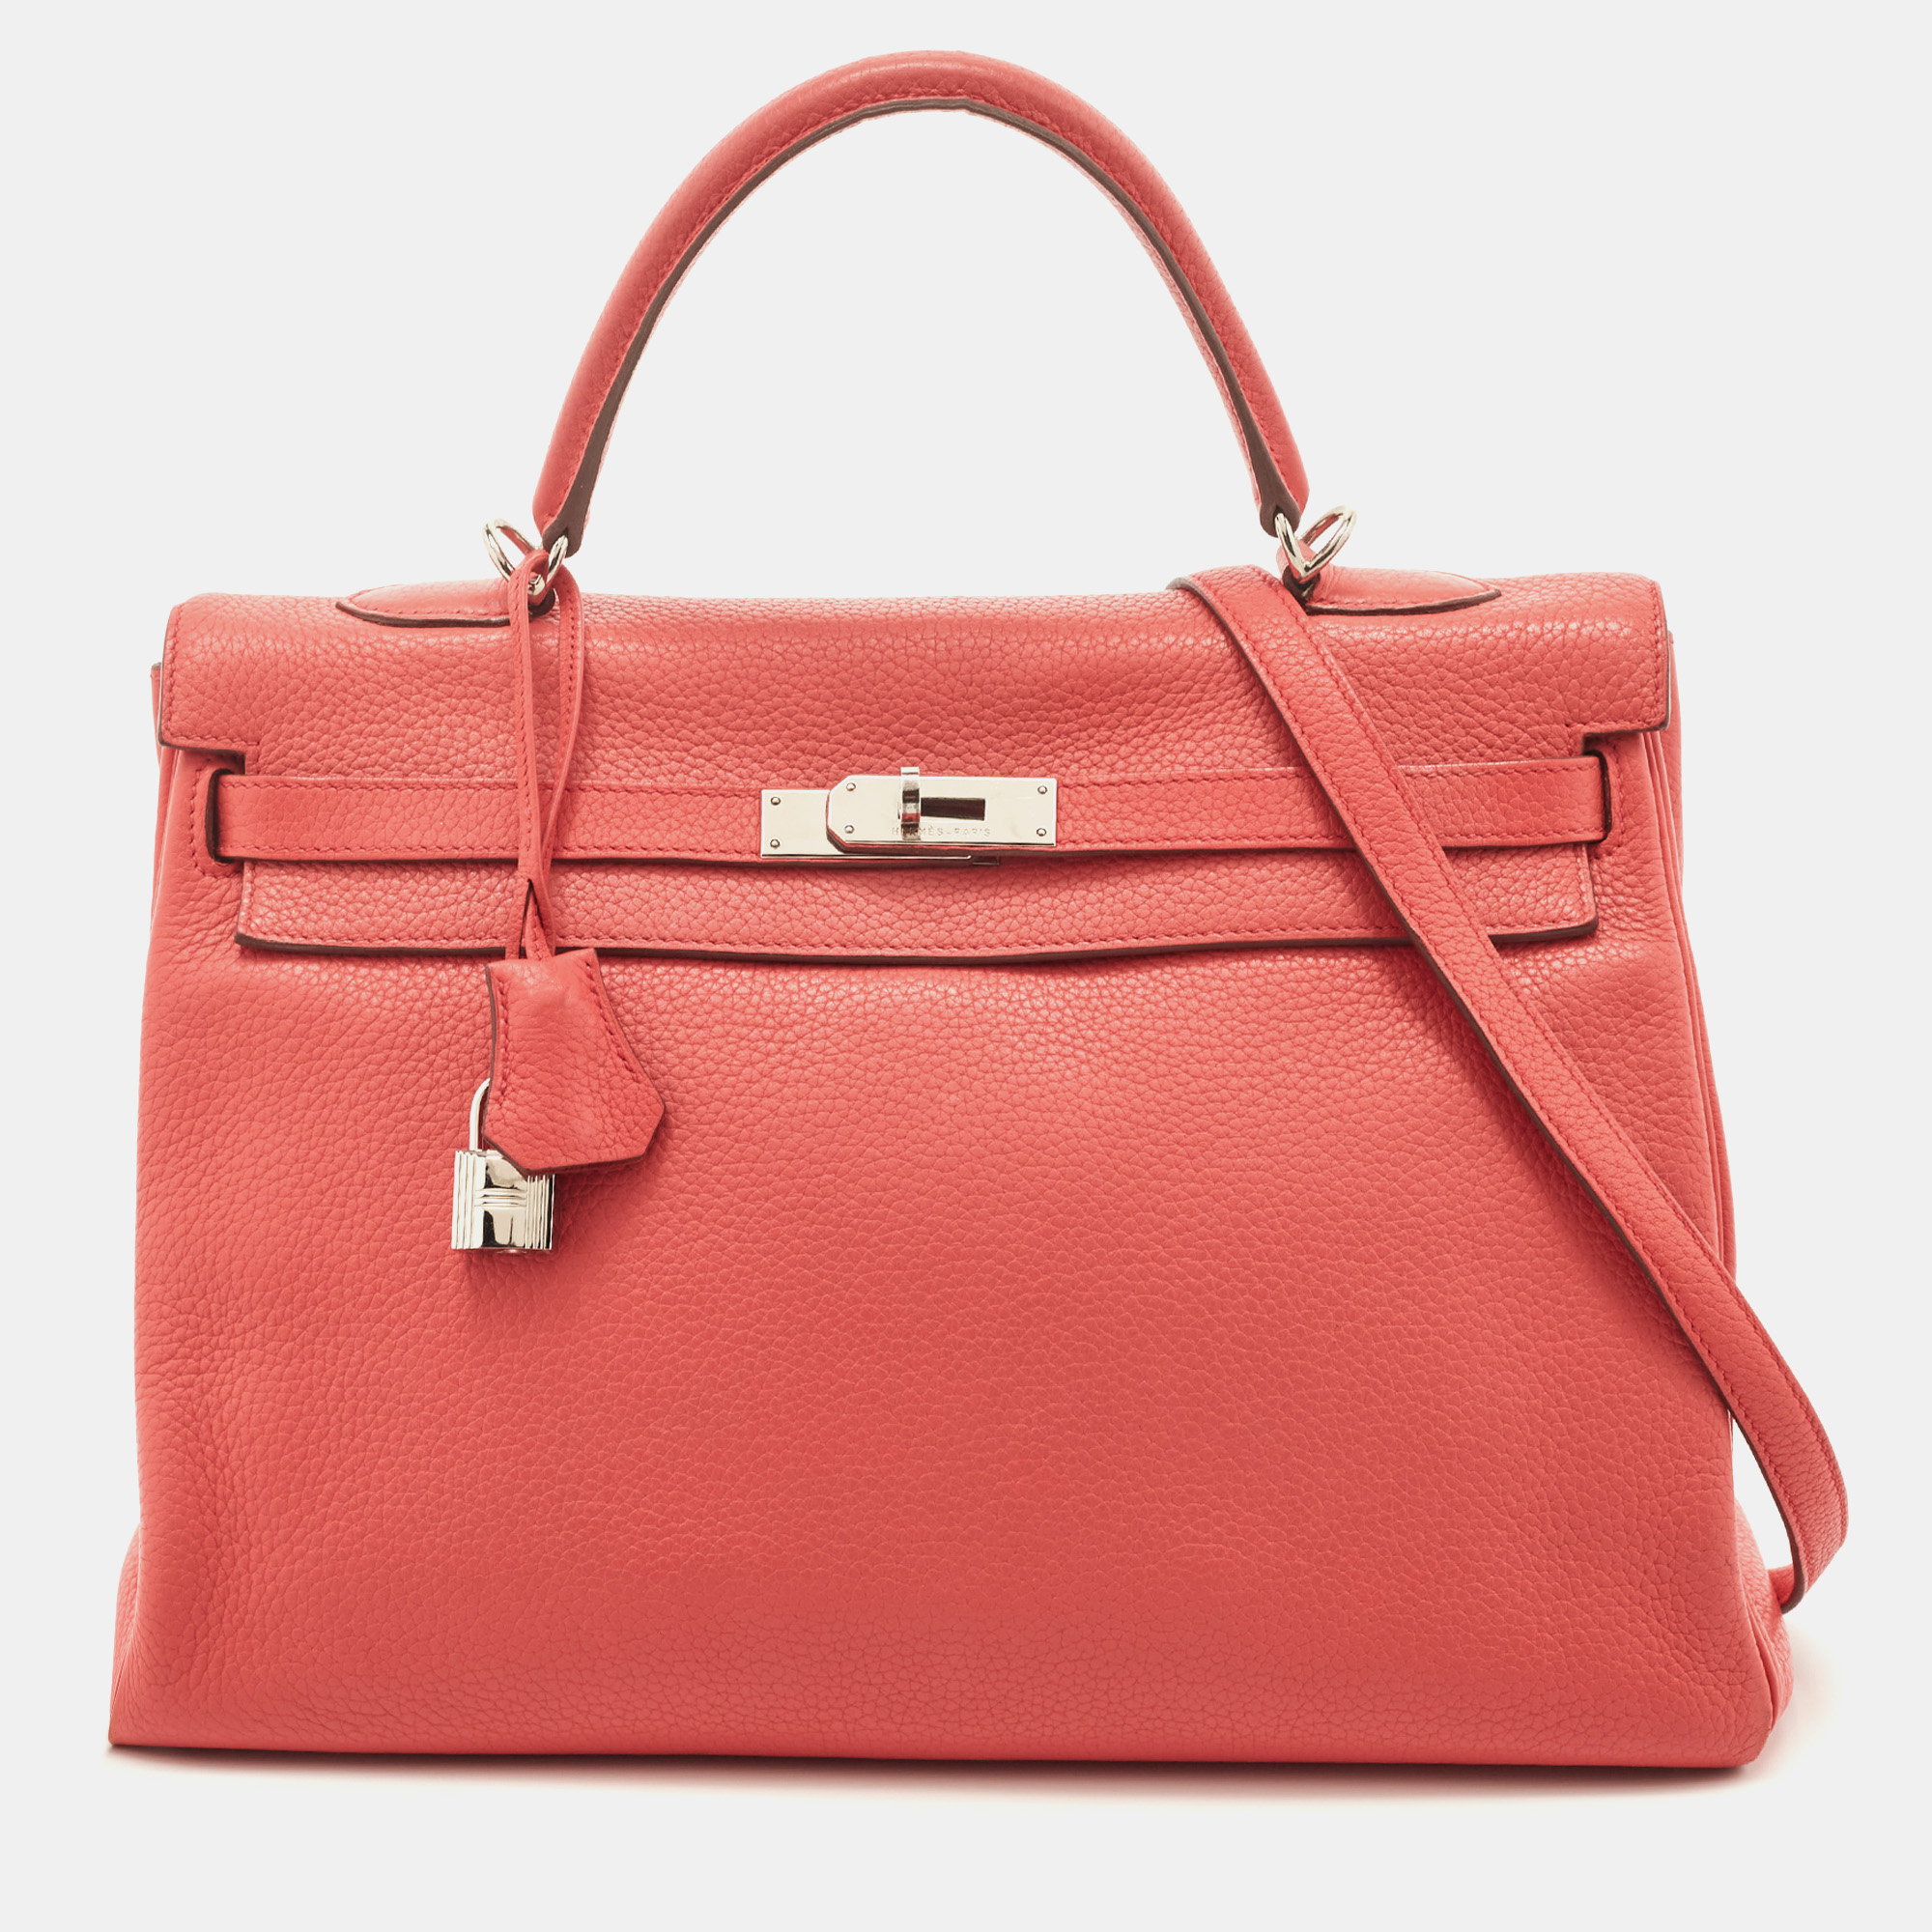 Rose Jaipur, Etoupe and Argile in Swift and Clemence Leather Birkin 35  Palladium Hardware, 2012, Handbags and Accessories, 2021